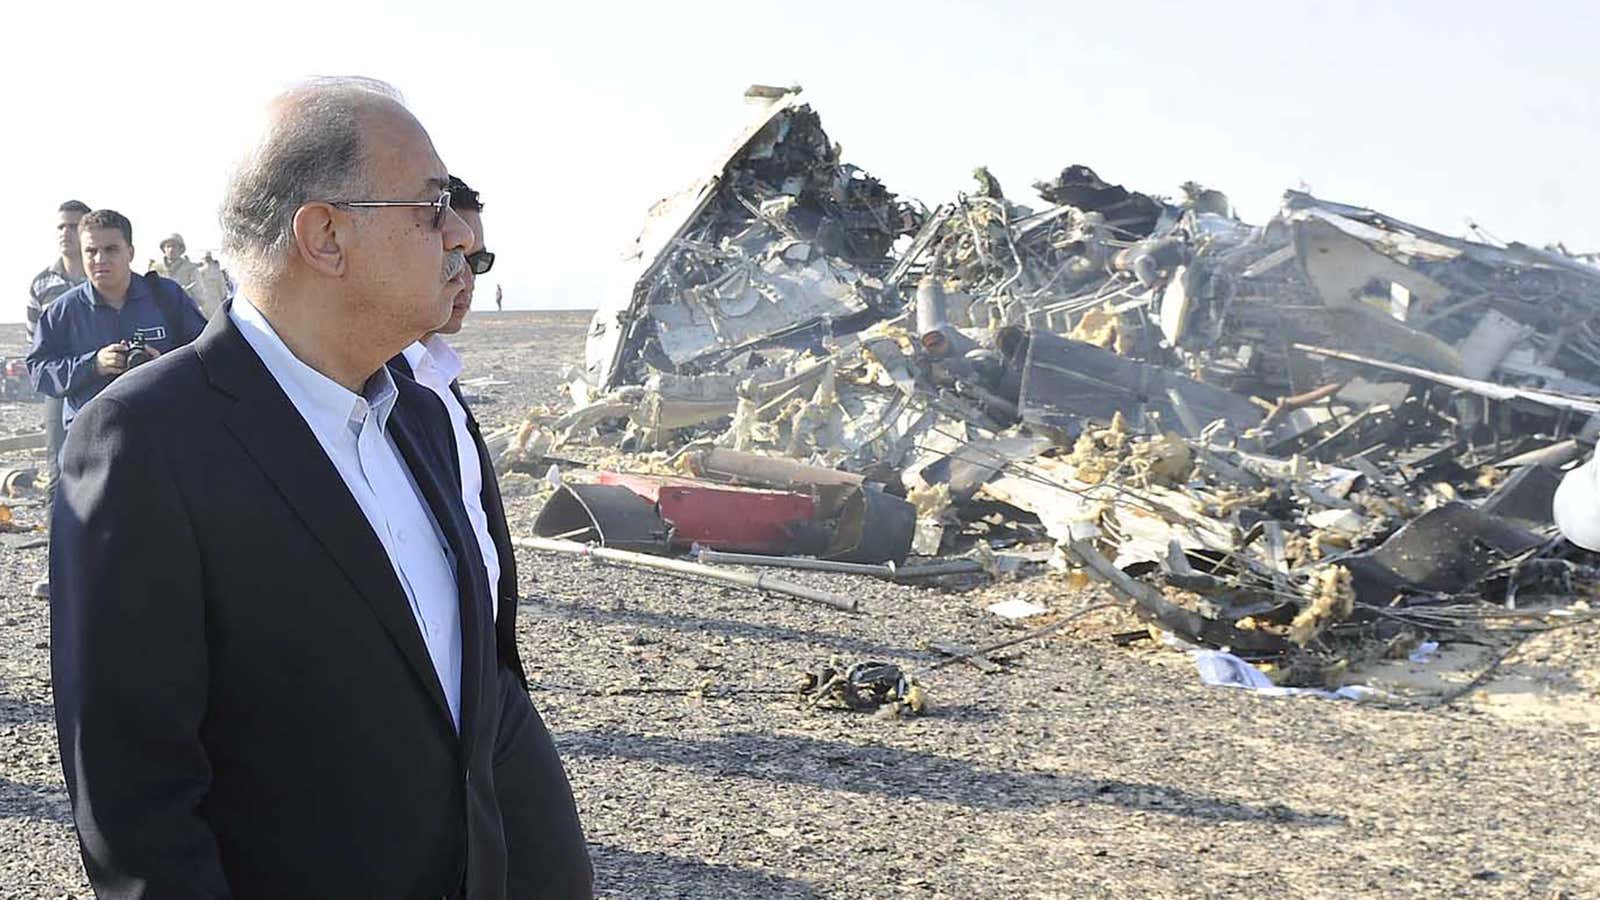 Egypt’s Prime Minister Sherif Ismail looks at the remains of the Russian airliner.